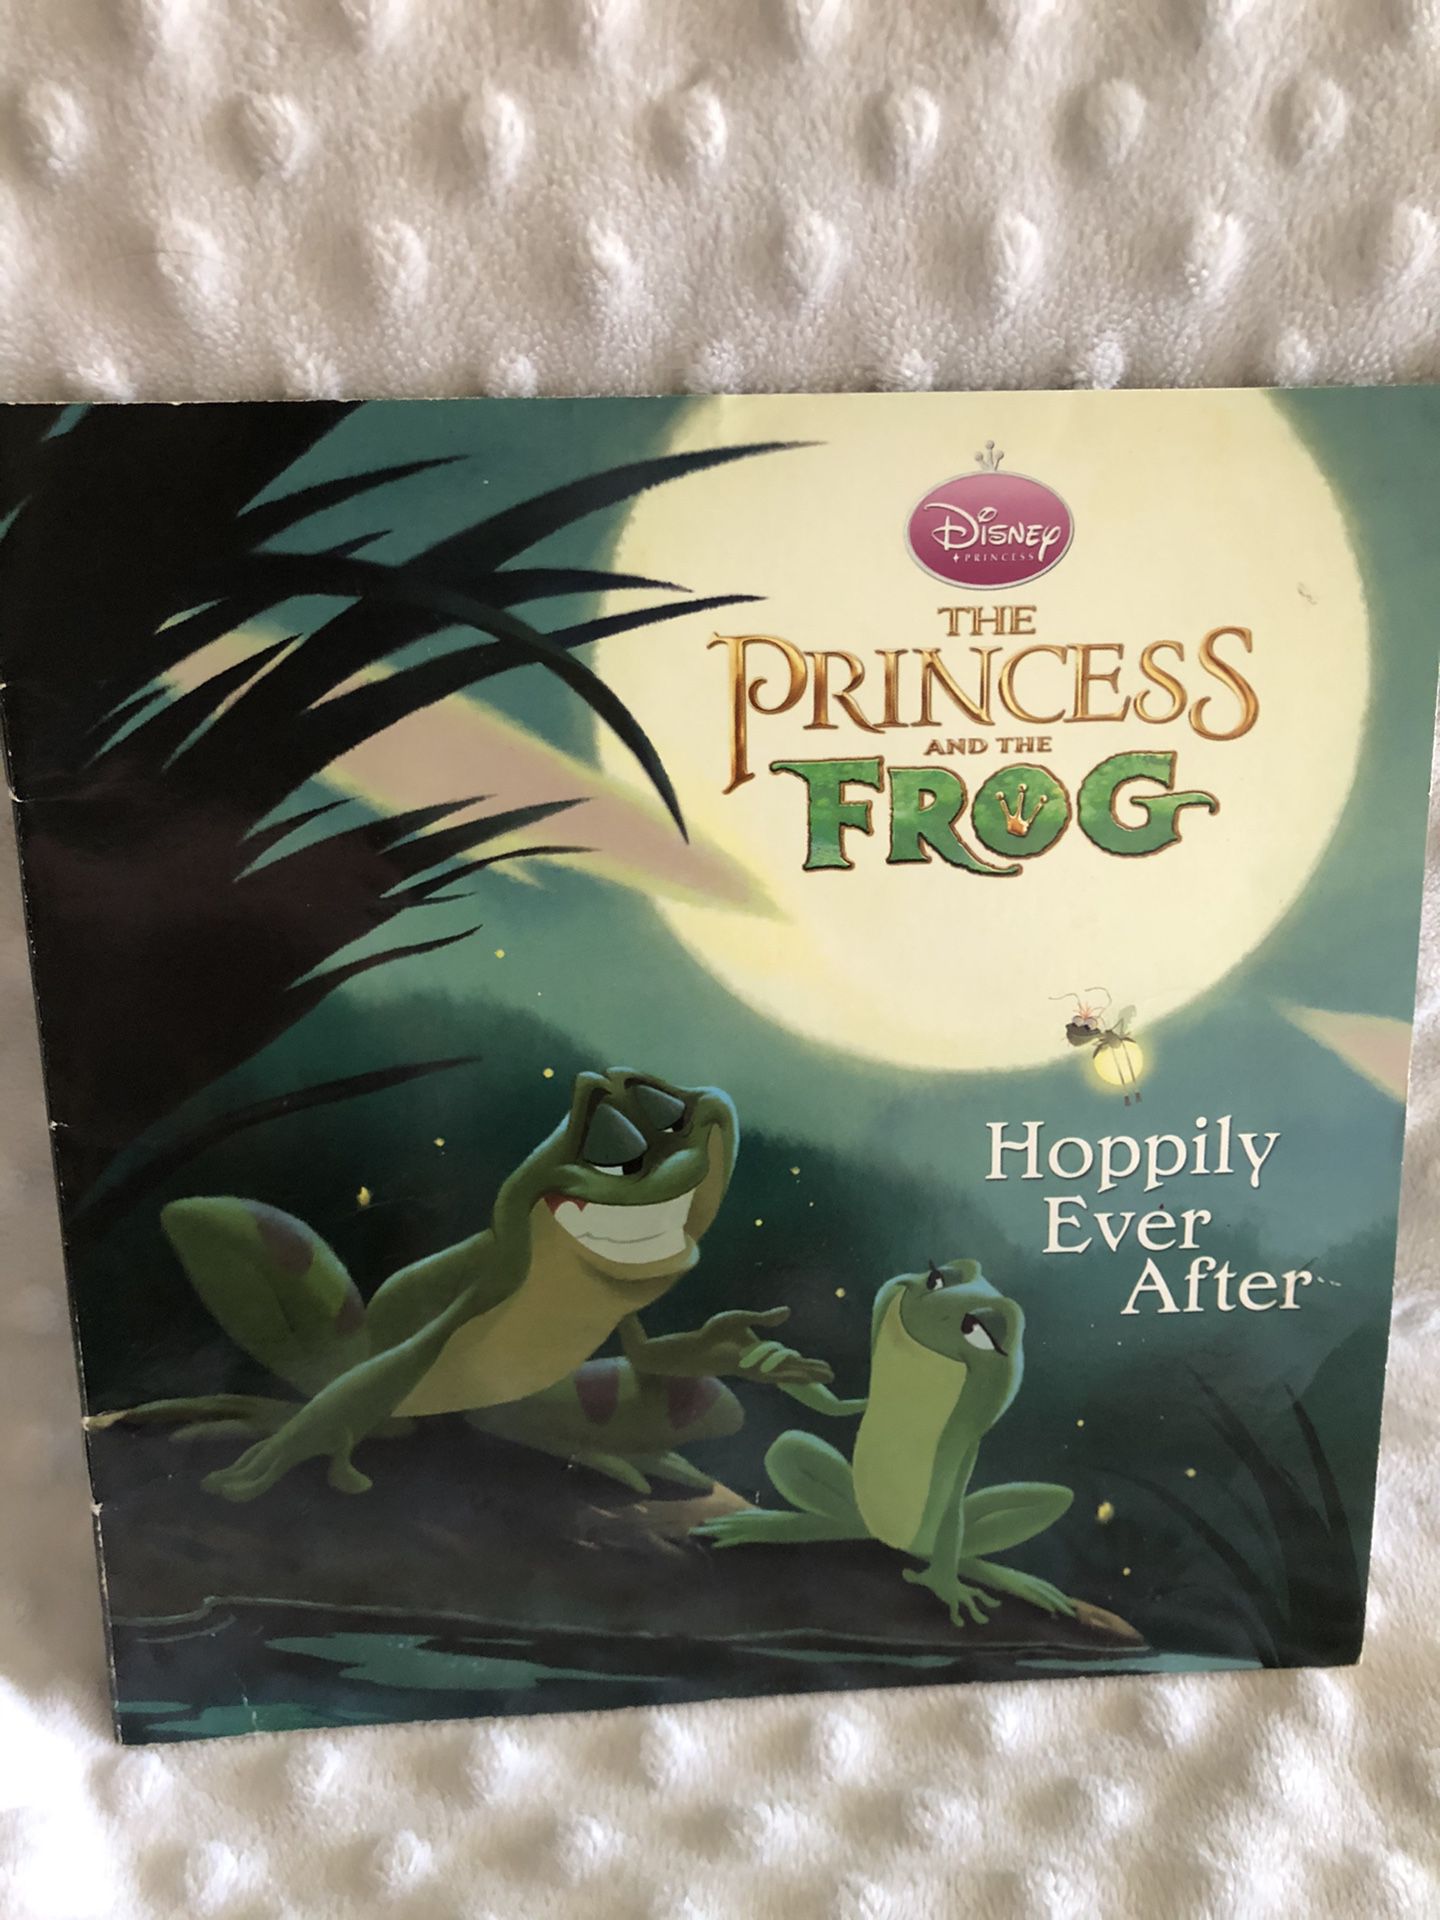 Wow! Disney Princess and the frog 🐸 hoppily ever after book! Very hard to find! Only 1 available! Louis, prince, Tiana, ray the firefly, mama Odie, N